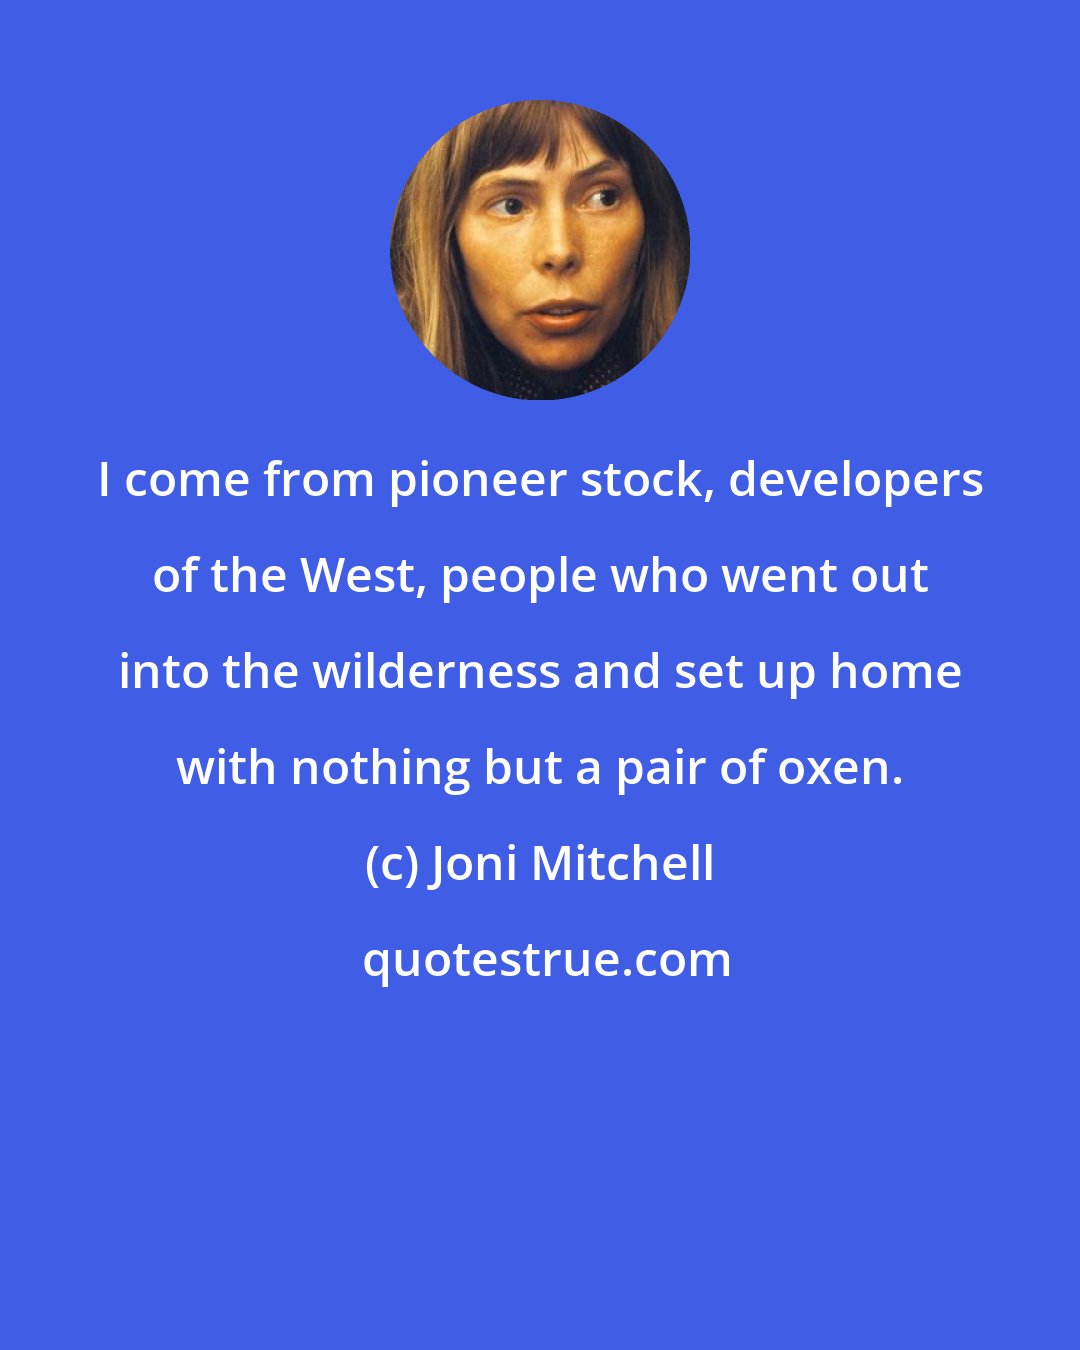 Joni Mitchell: I come from pioneer stock, developers of the West, people who went out into the wilderness and set up home with nothing but a pair of oxen.